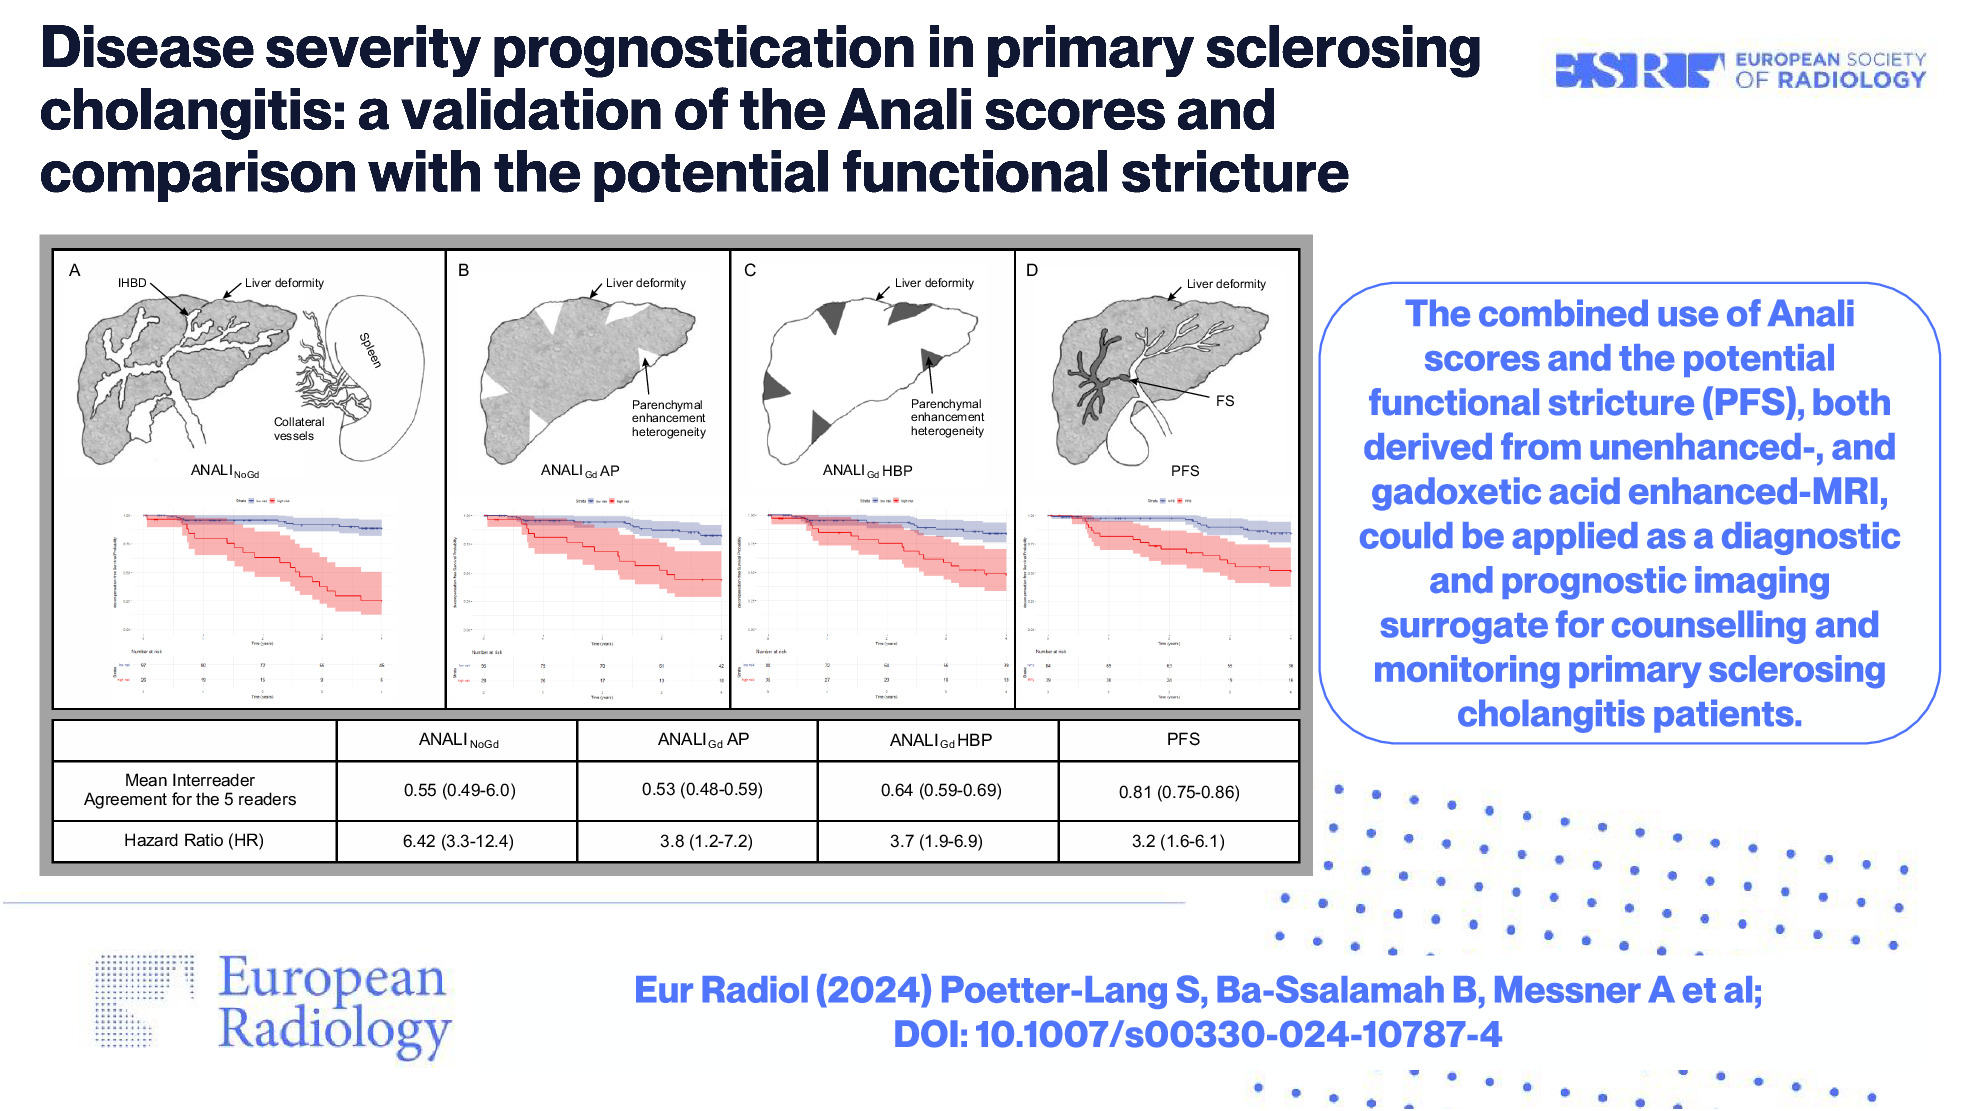 Disease severity prognostication in primary sclerosing cholangitis: a validation of the Anali scores and comparison with the potential functional stricture